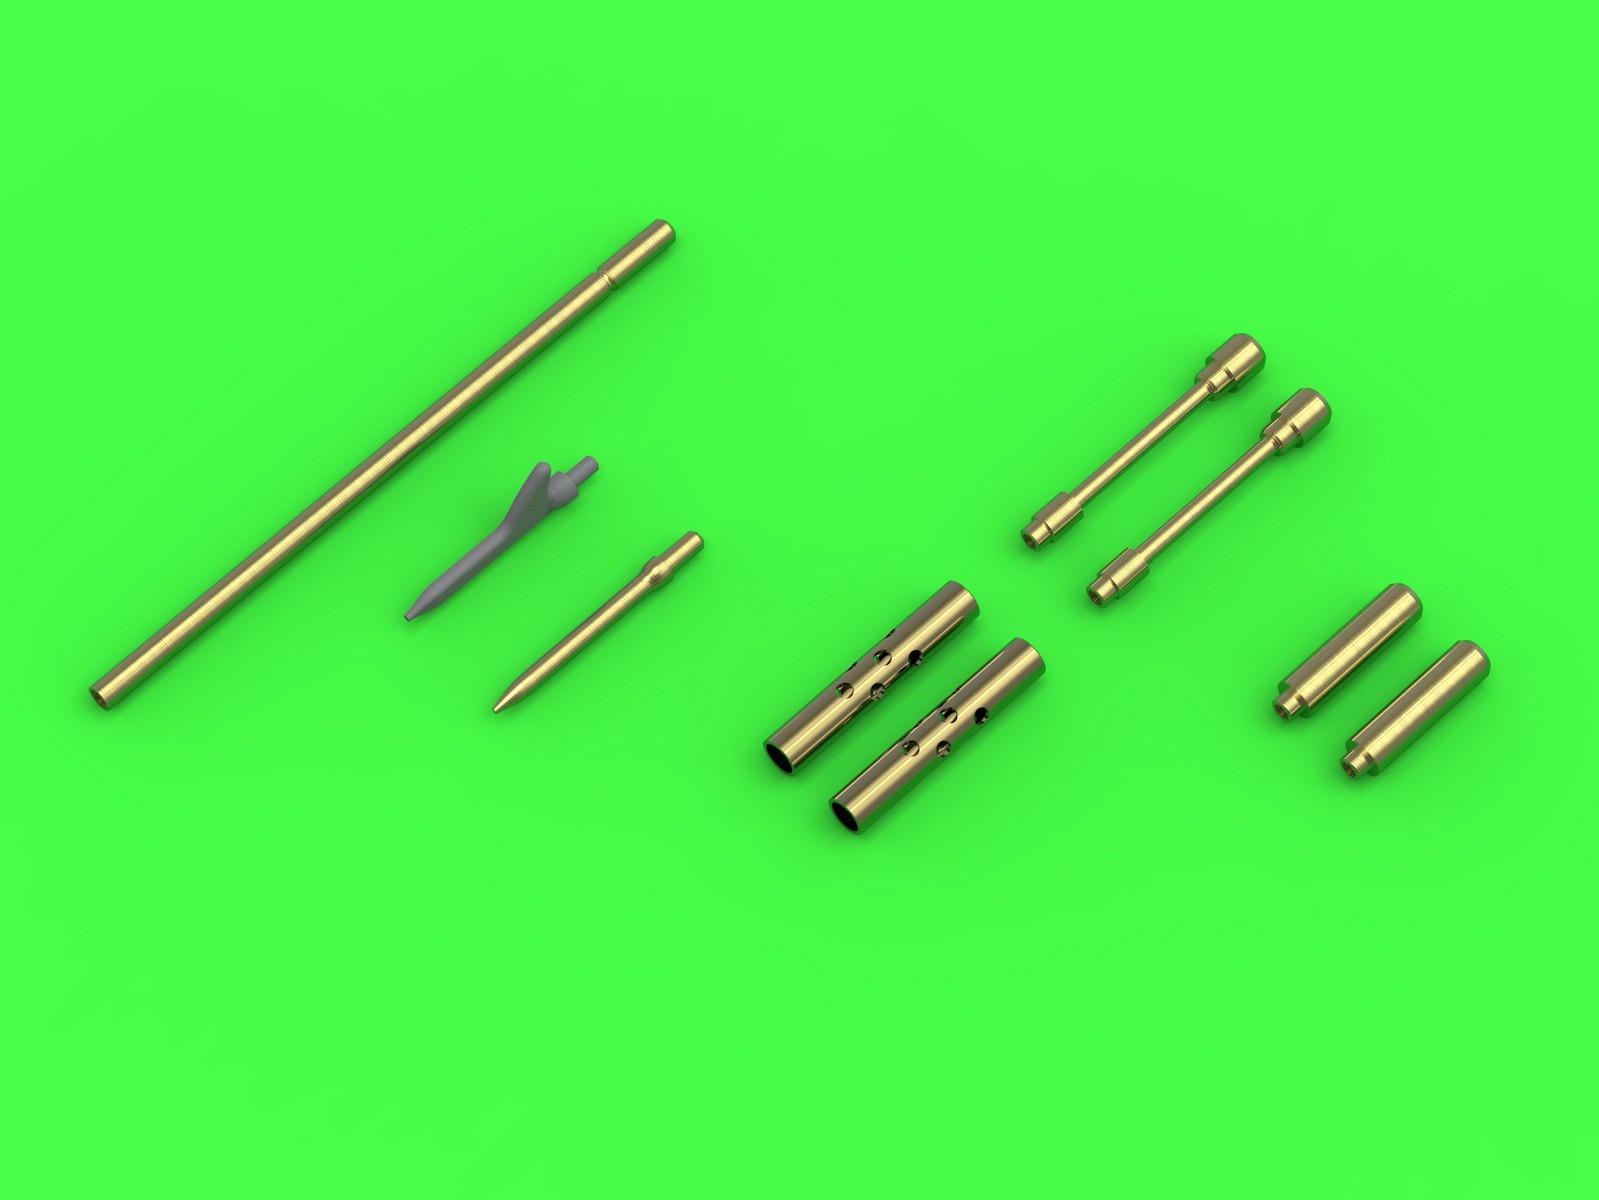 Aircraft detailing sets (brass) 1/48 Grumman F4F-3 Wildcat LATE - .50 Browning gun barrels with round holes & Pitot Tube (two options)